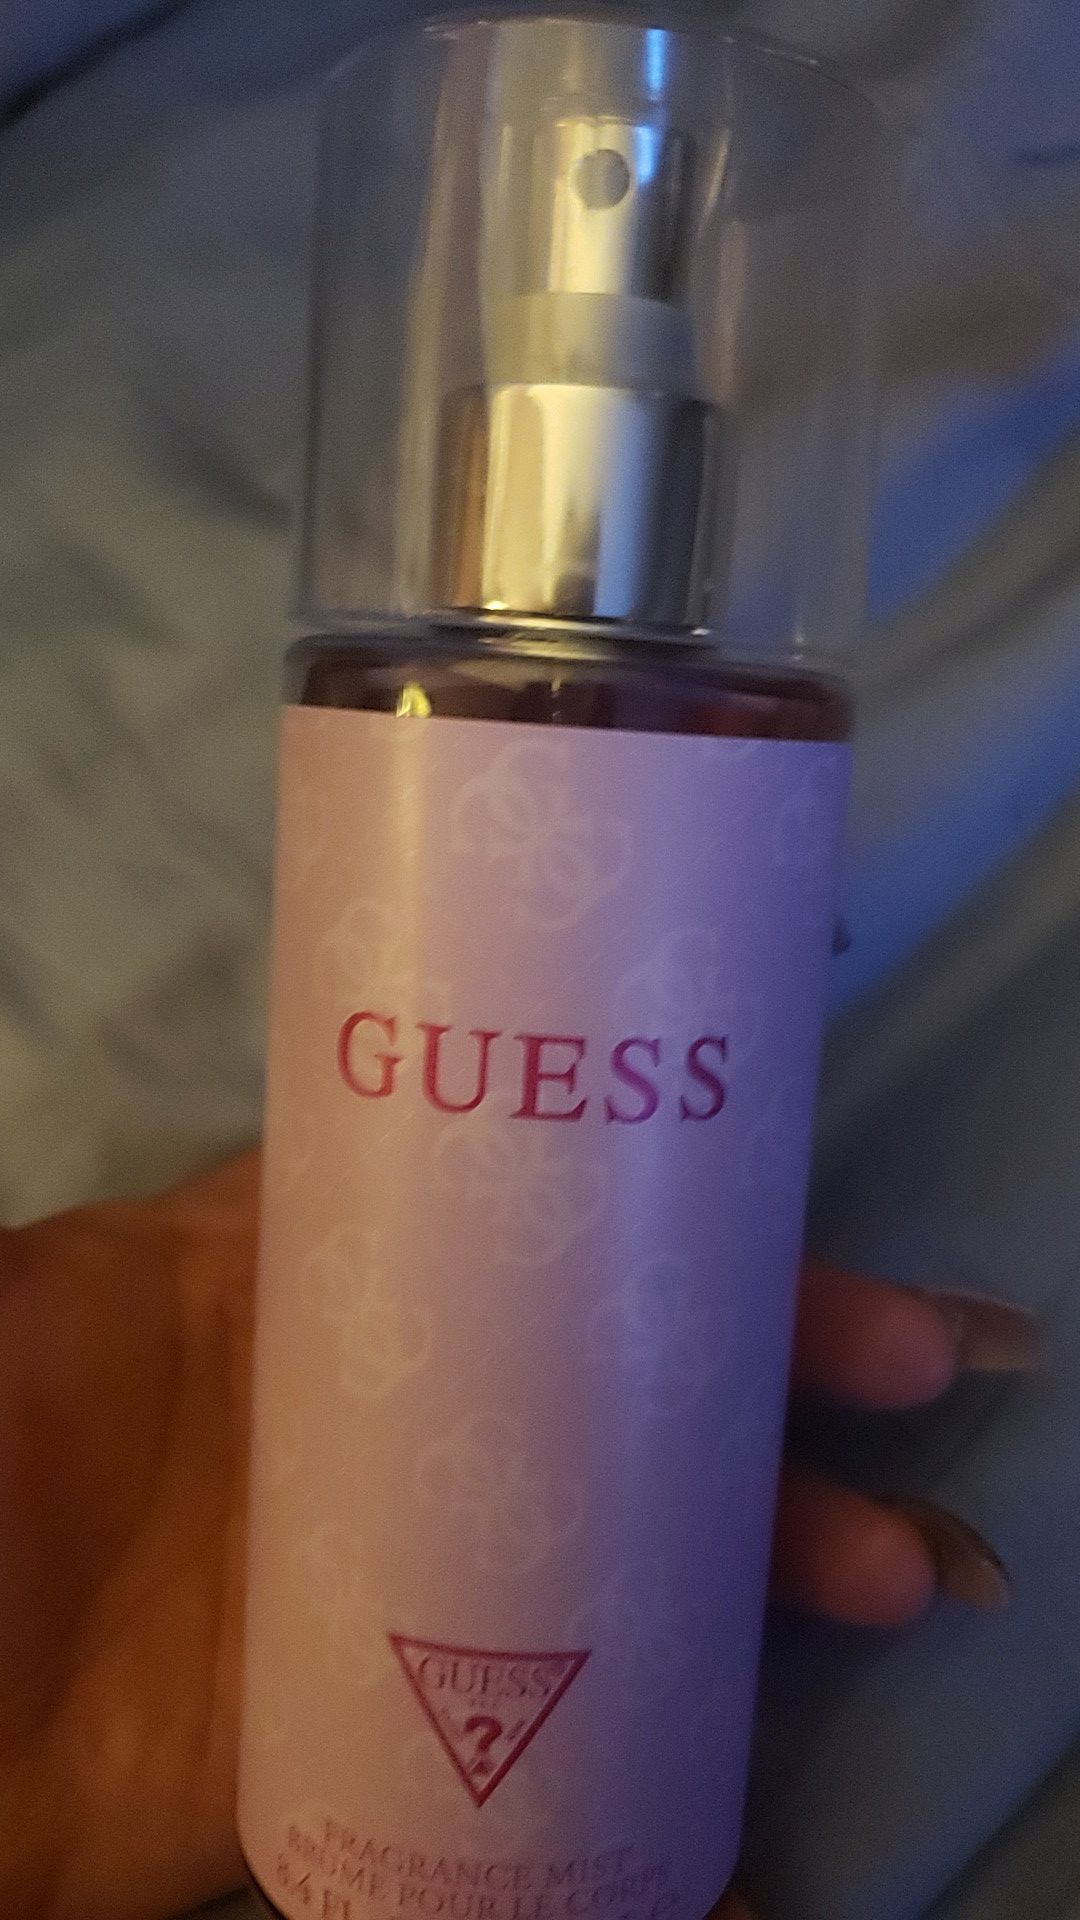 Guess fragrance mist